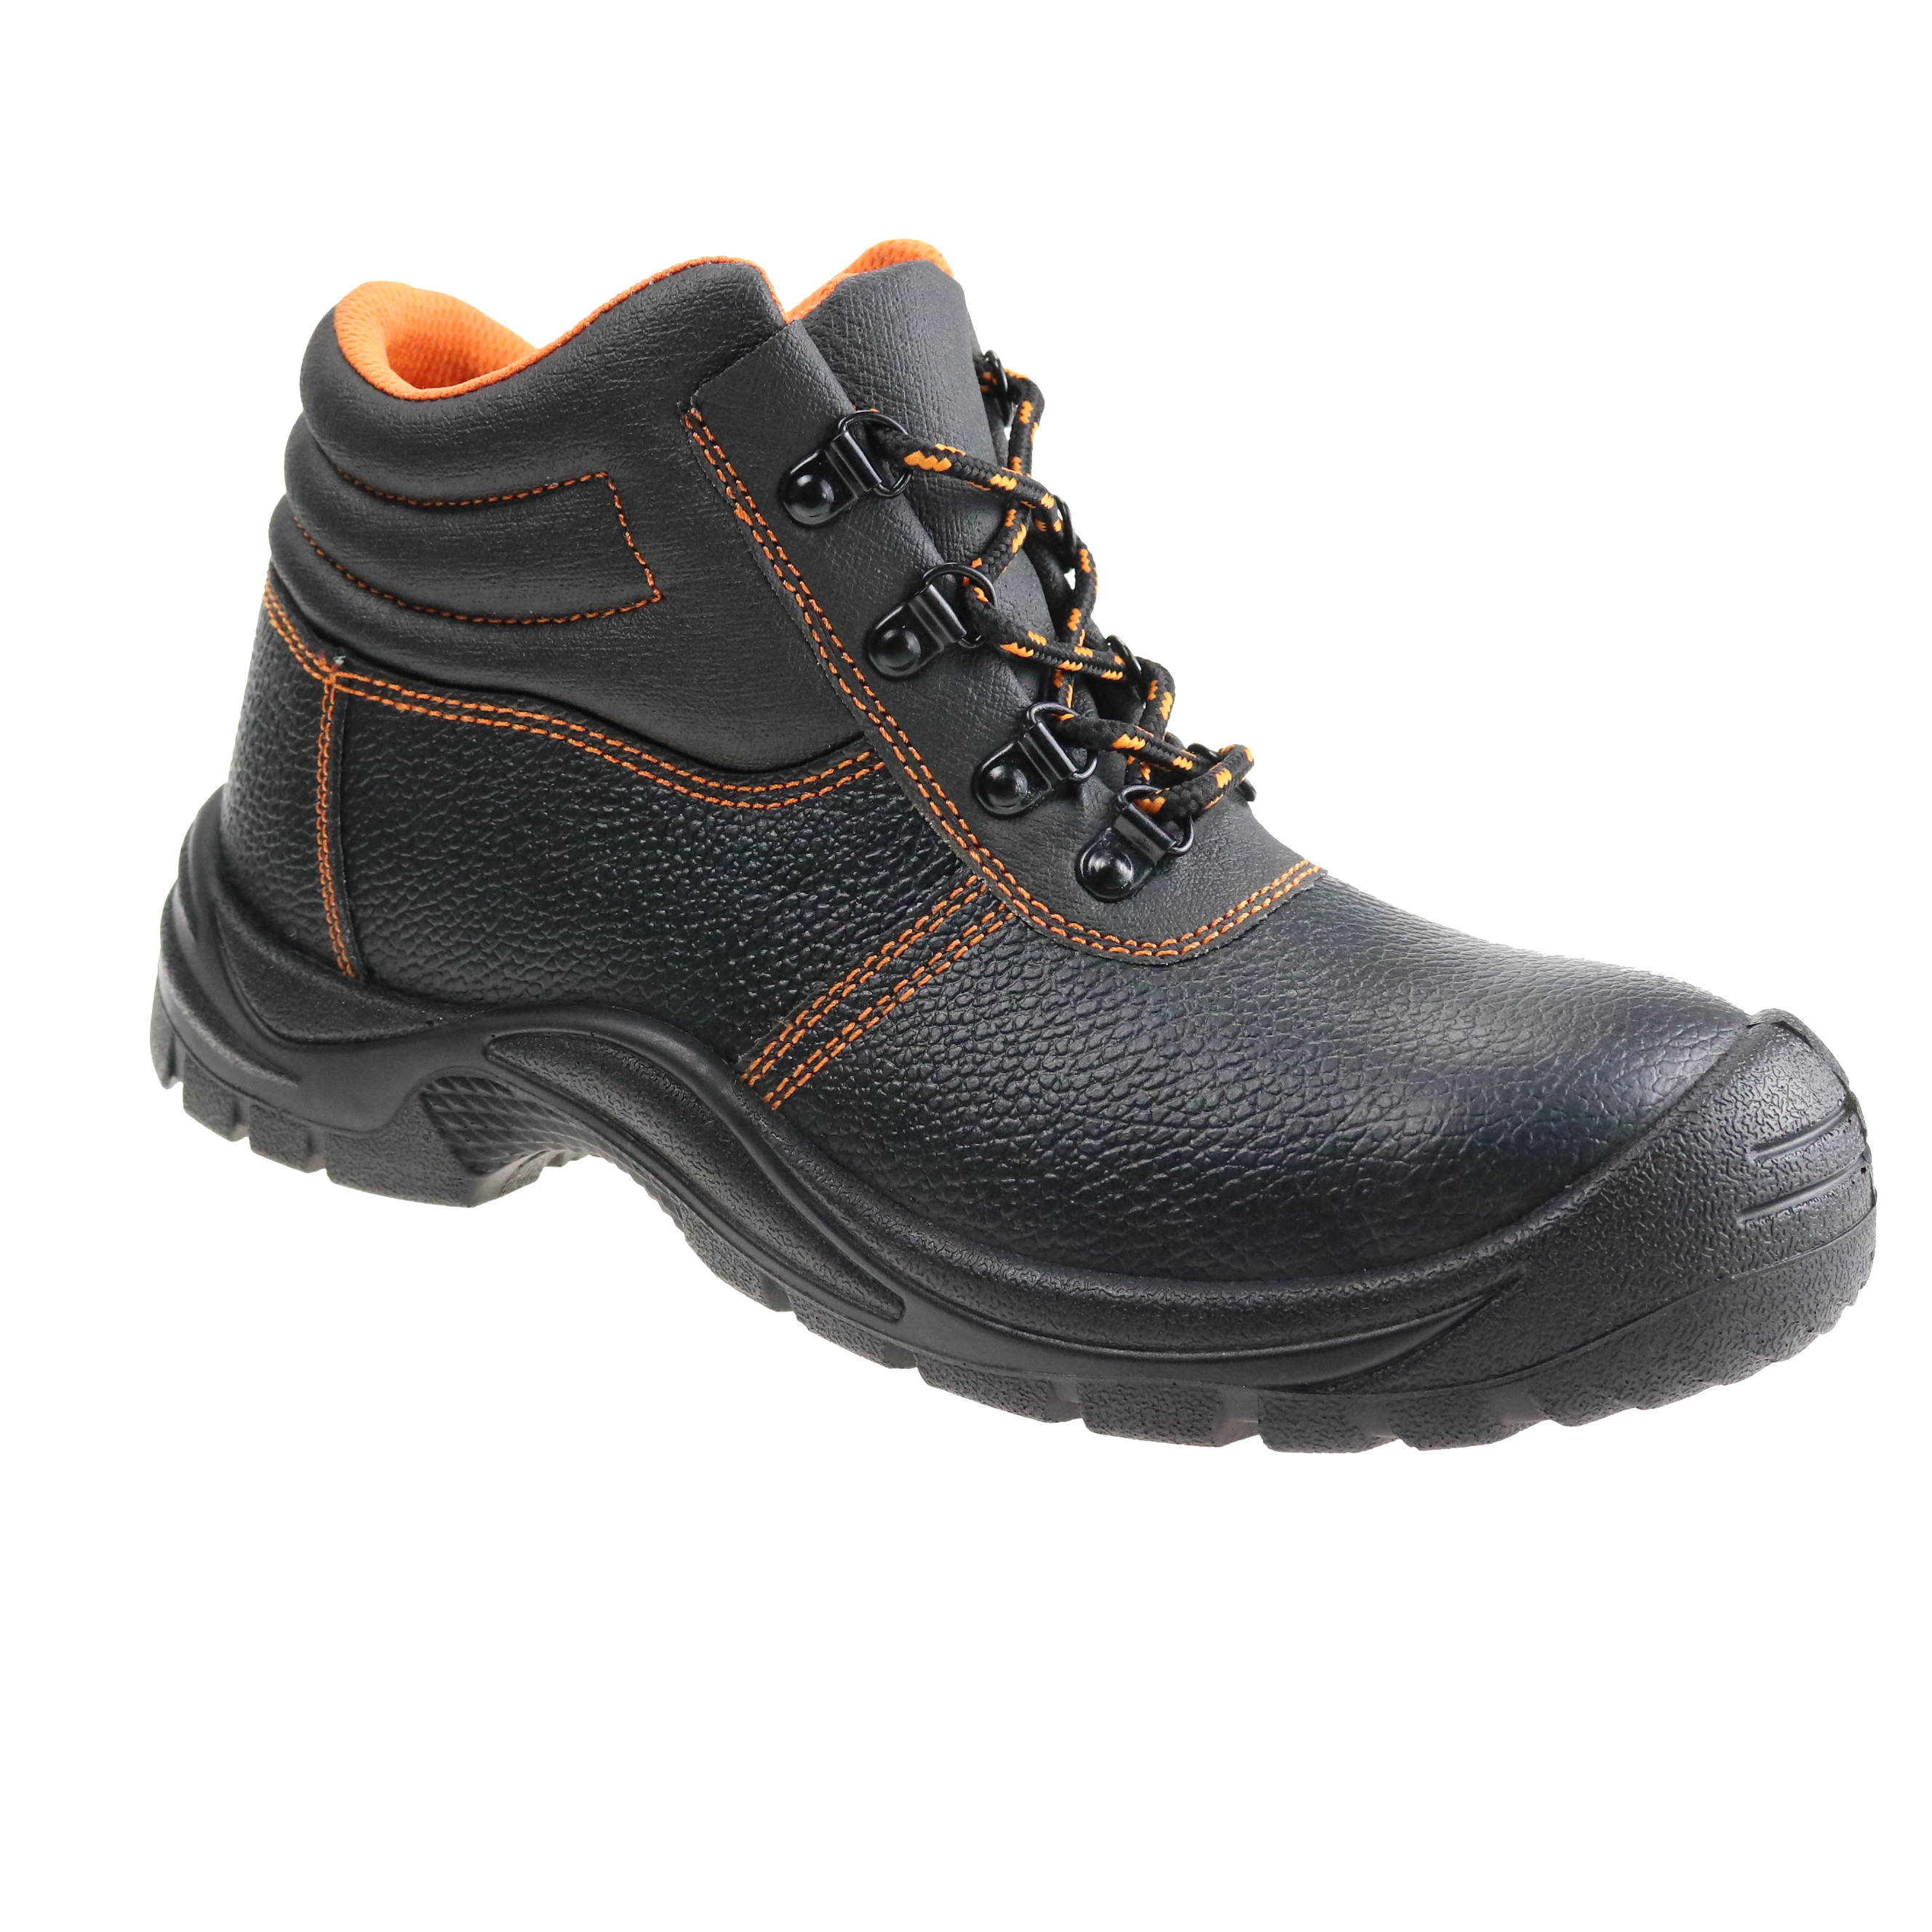 High quality chemical resistant waterproof s3 men's safety shoes with steel toe